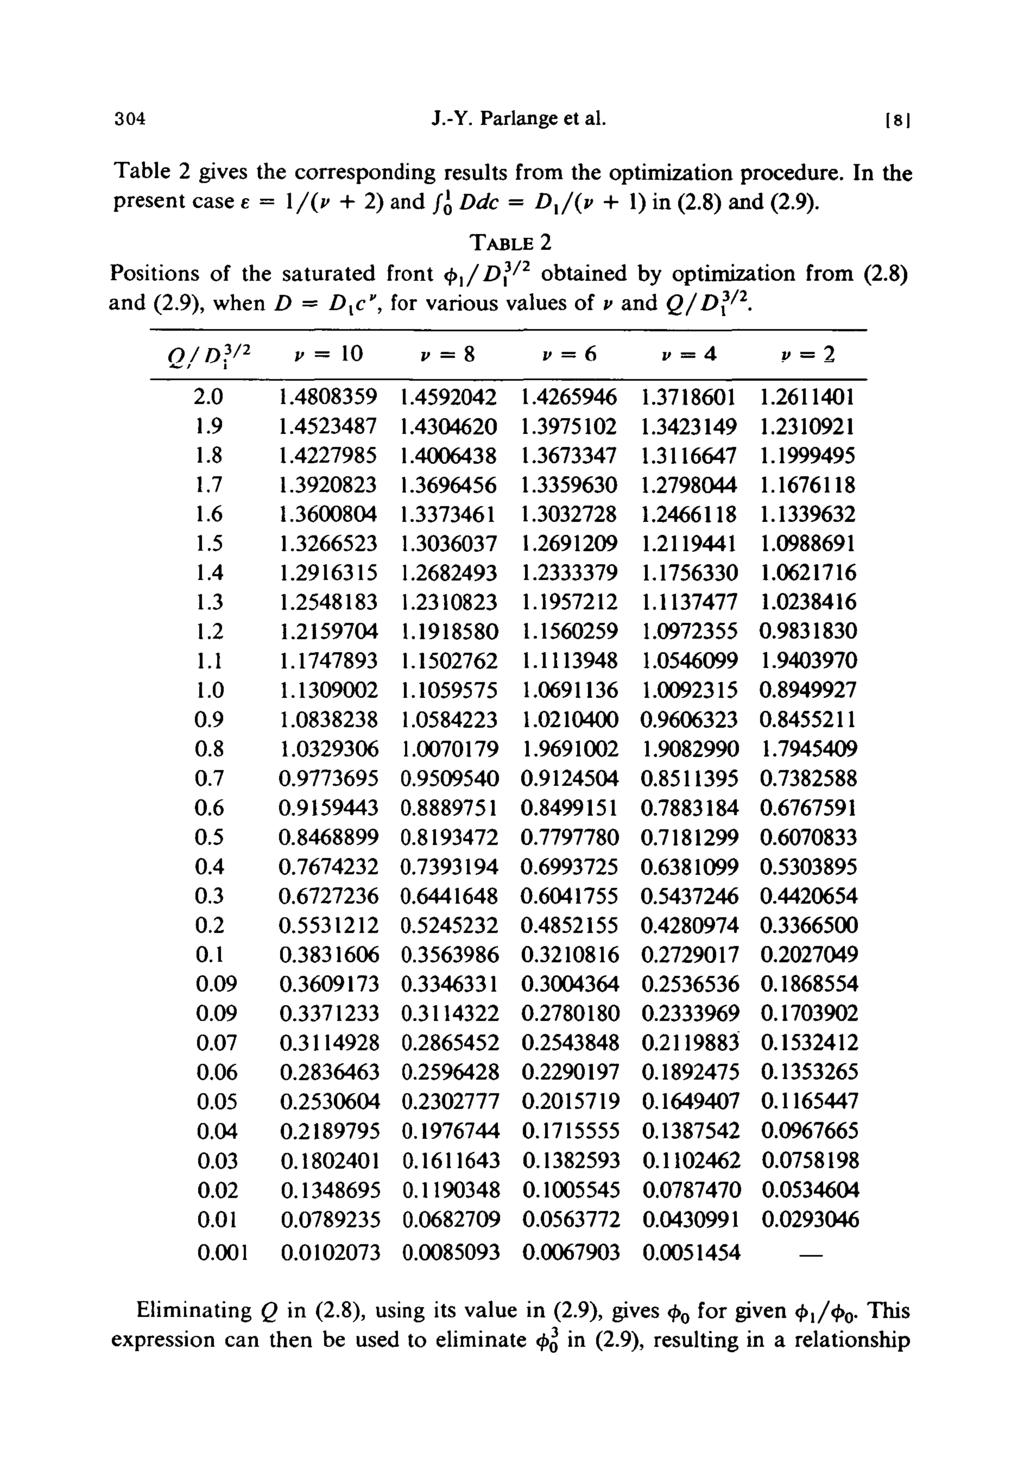 304 J.-Y. Parlange et al. Table 2 gives the corresponding results from the optimization procedure. In the present case e = \/(y + 2) and f l 0 Ddc = D x /(v + 1) in (2.8) and (2.9).